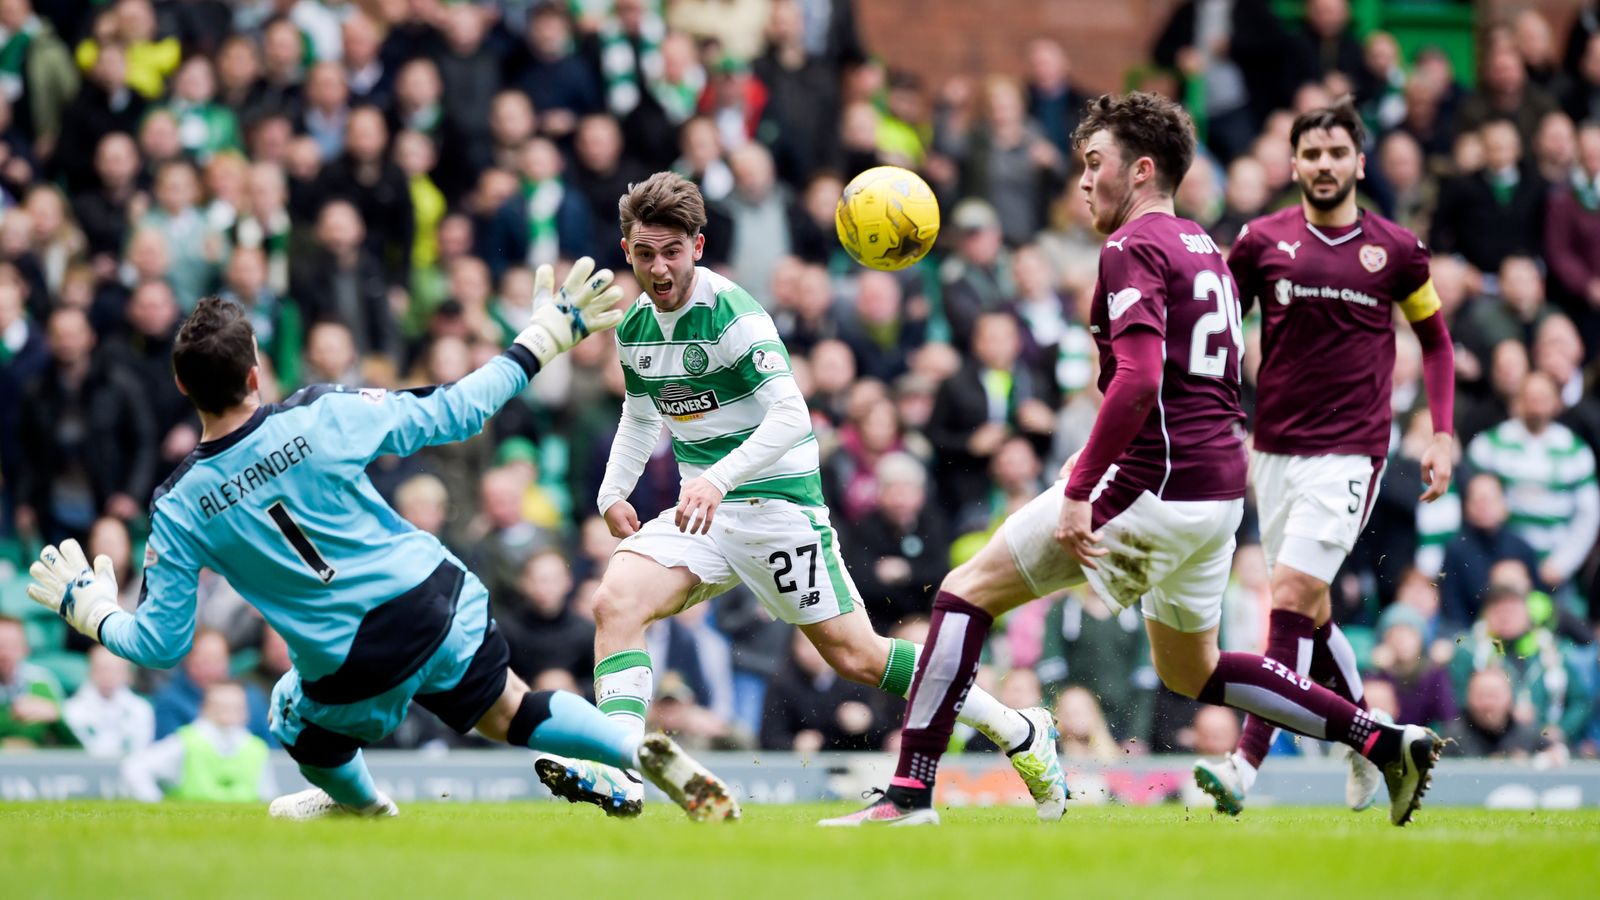 Celtic 3 - 1 Hearts - Match Report & Highlights1600 x 900